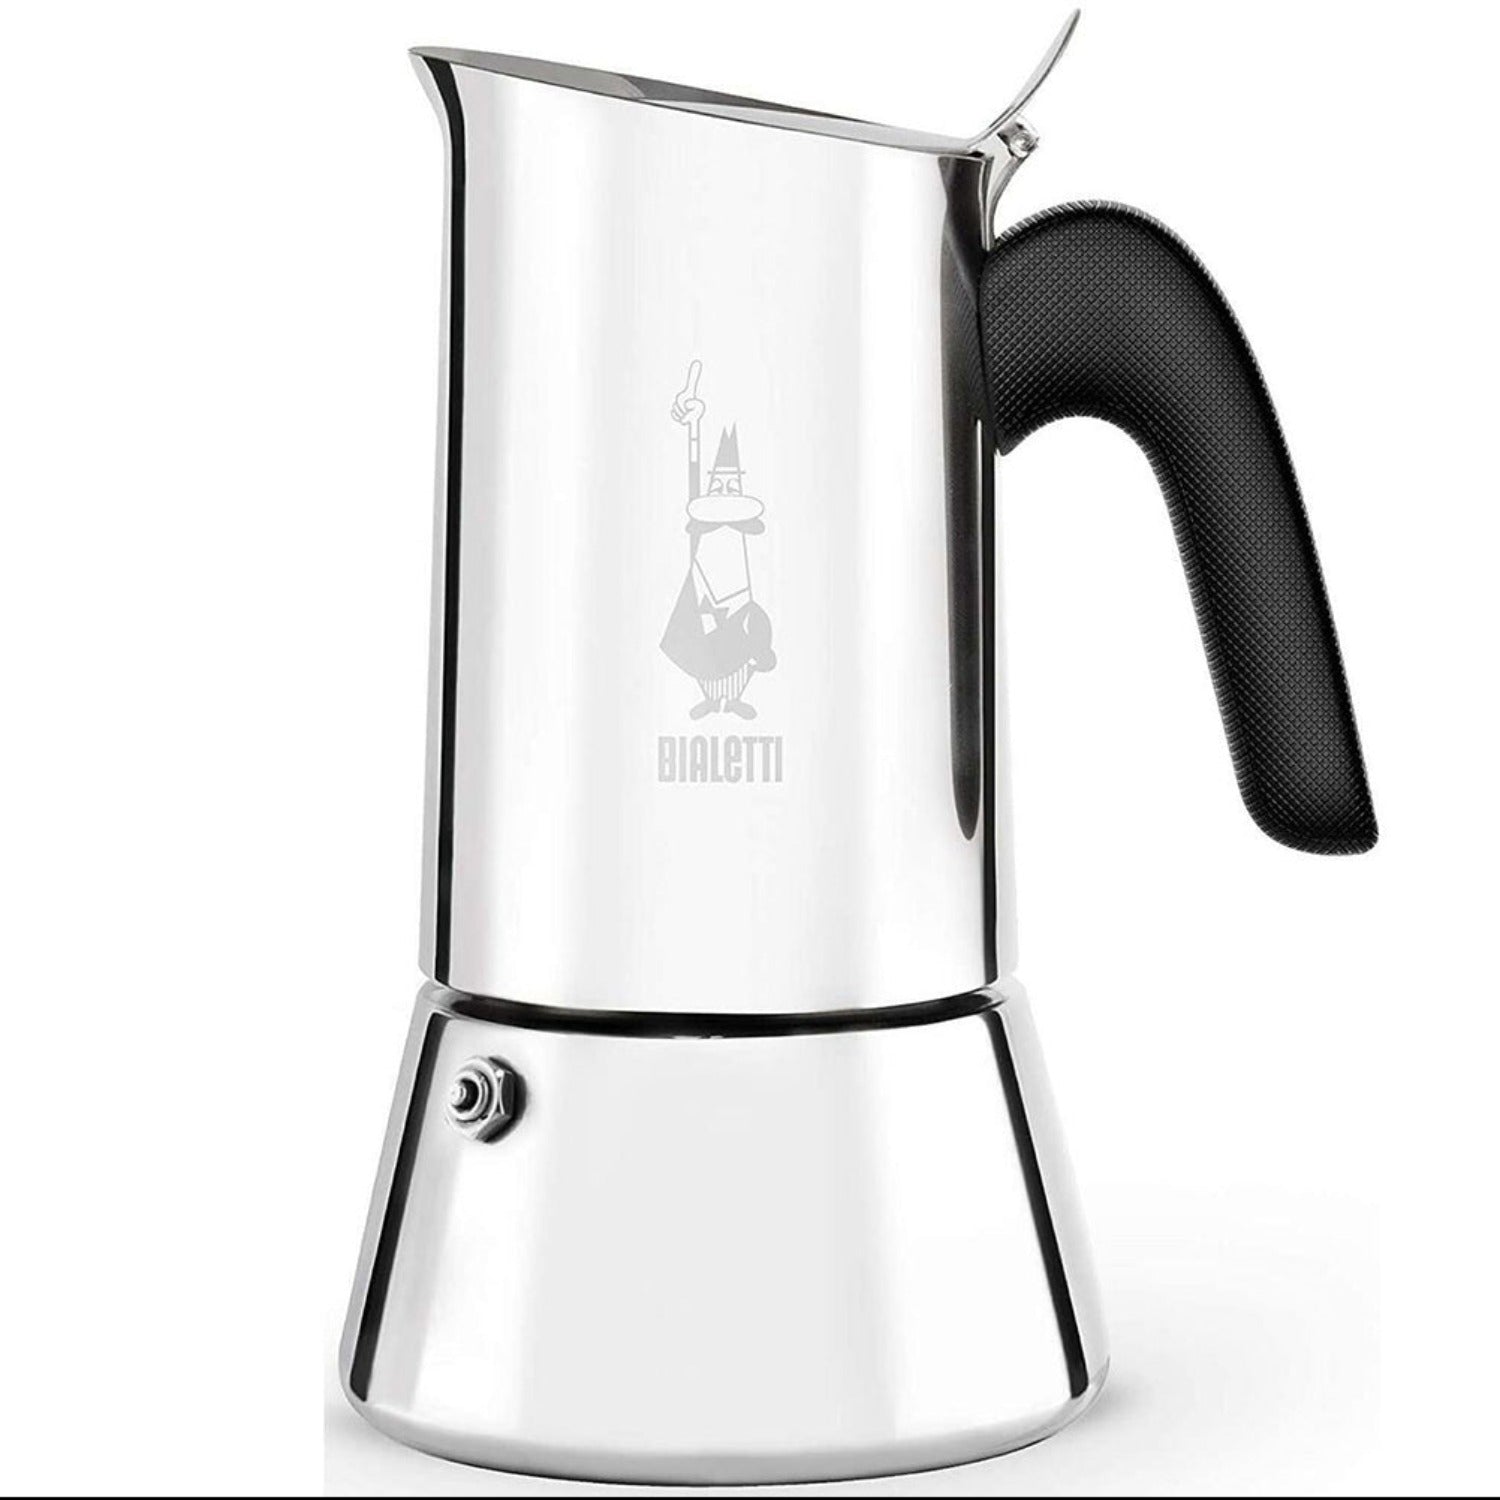 Bialetti 7255 Venus 6 Cup Induction Coffee Maker - Silver 1 Shaws Department Stores